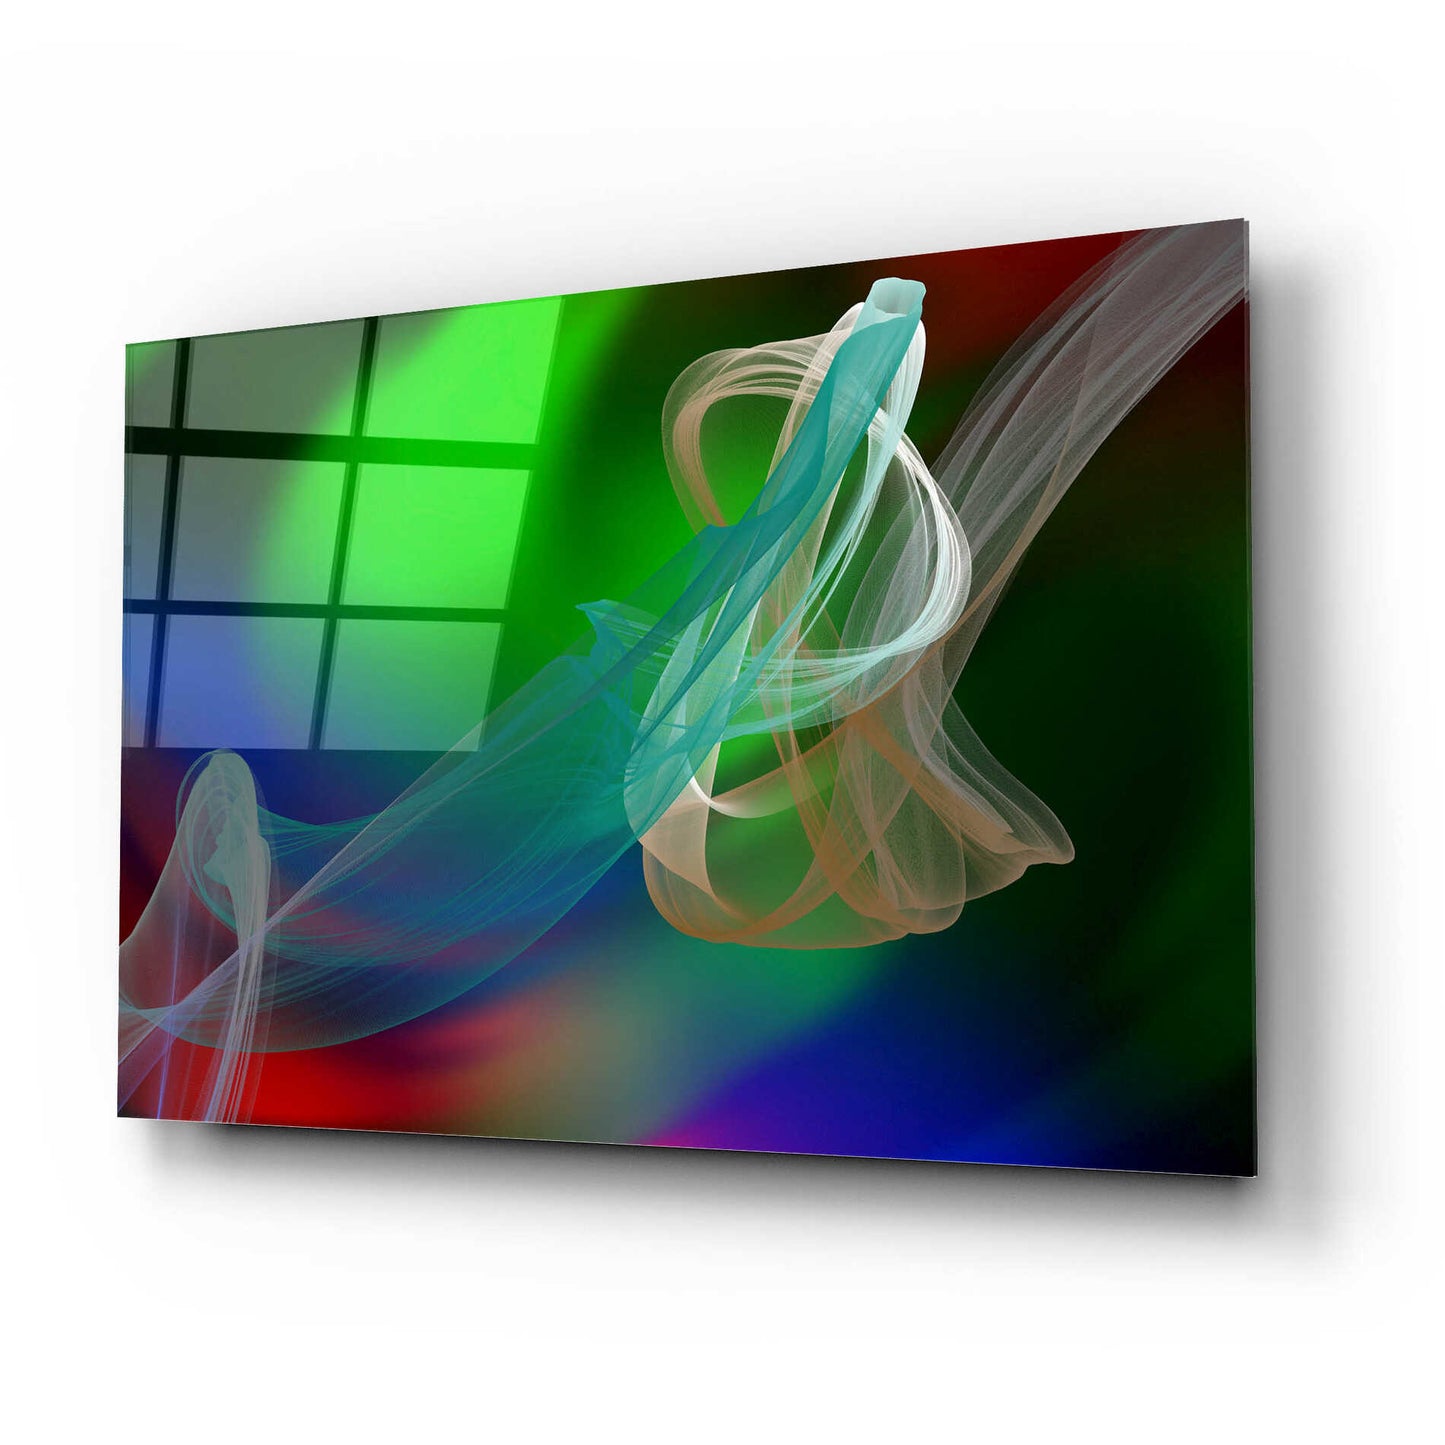 Epic Art 'Inverted Color In The Lines 1' by Irena Orlov Acrylic Glass Wall Art,24x16